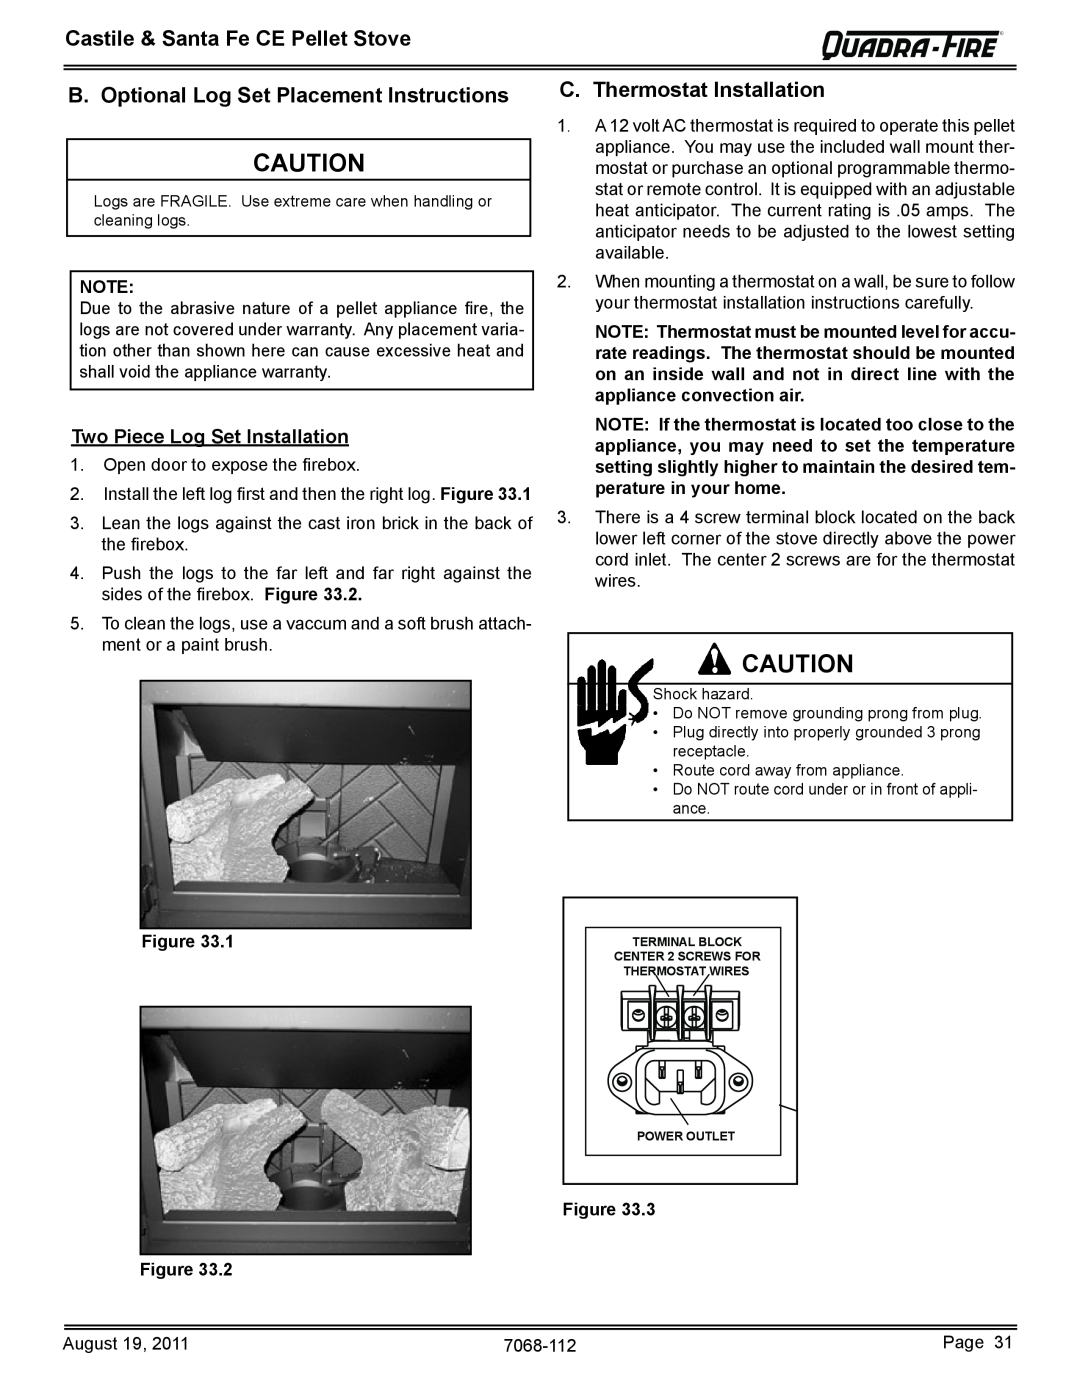 Quadra-Fire 7068-112 owner manual B. Optional Log Set Placement Instructions, C. Thermostat Installation 